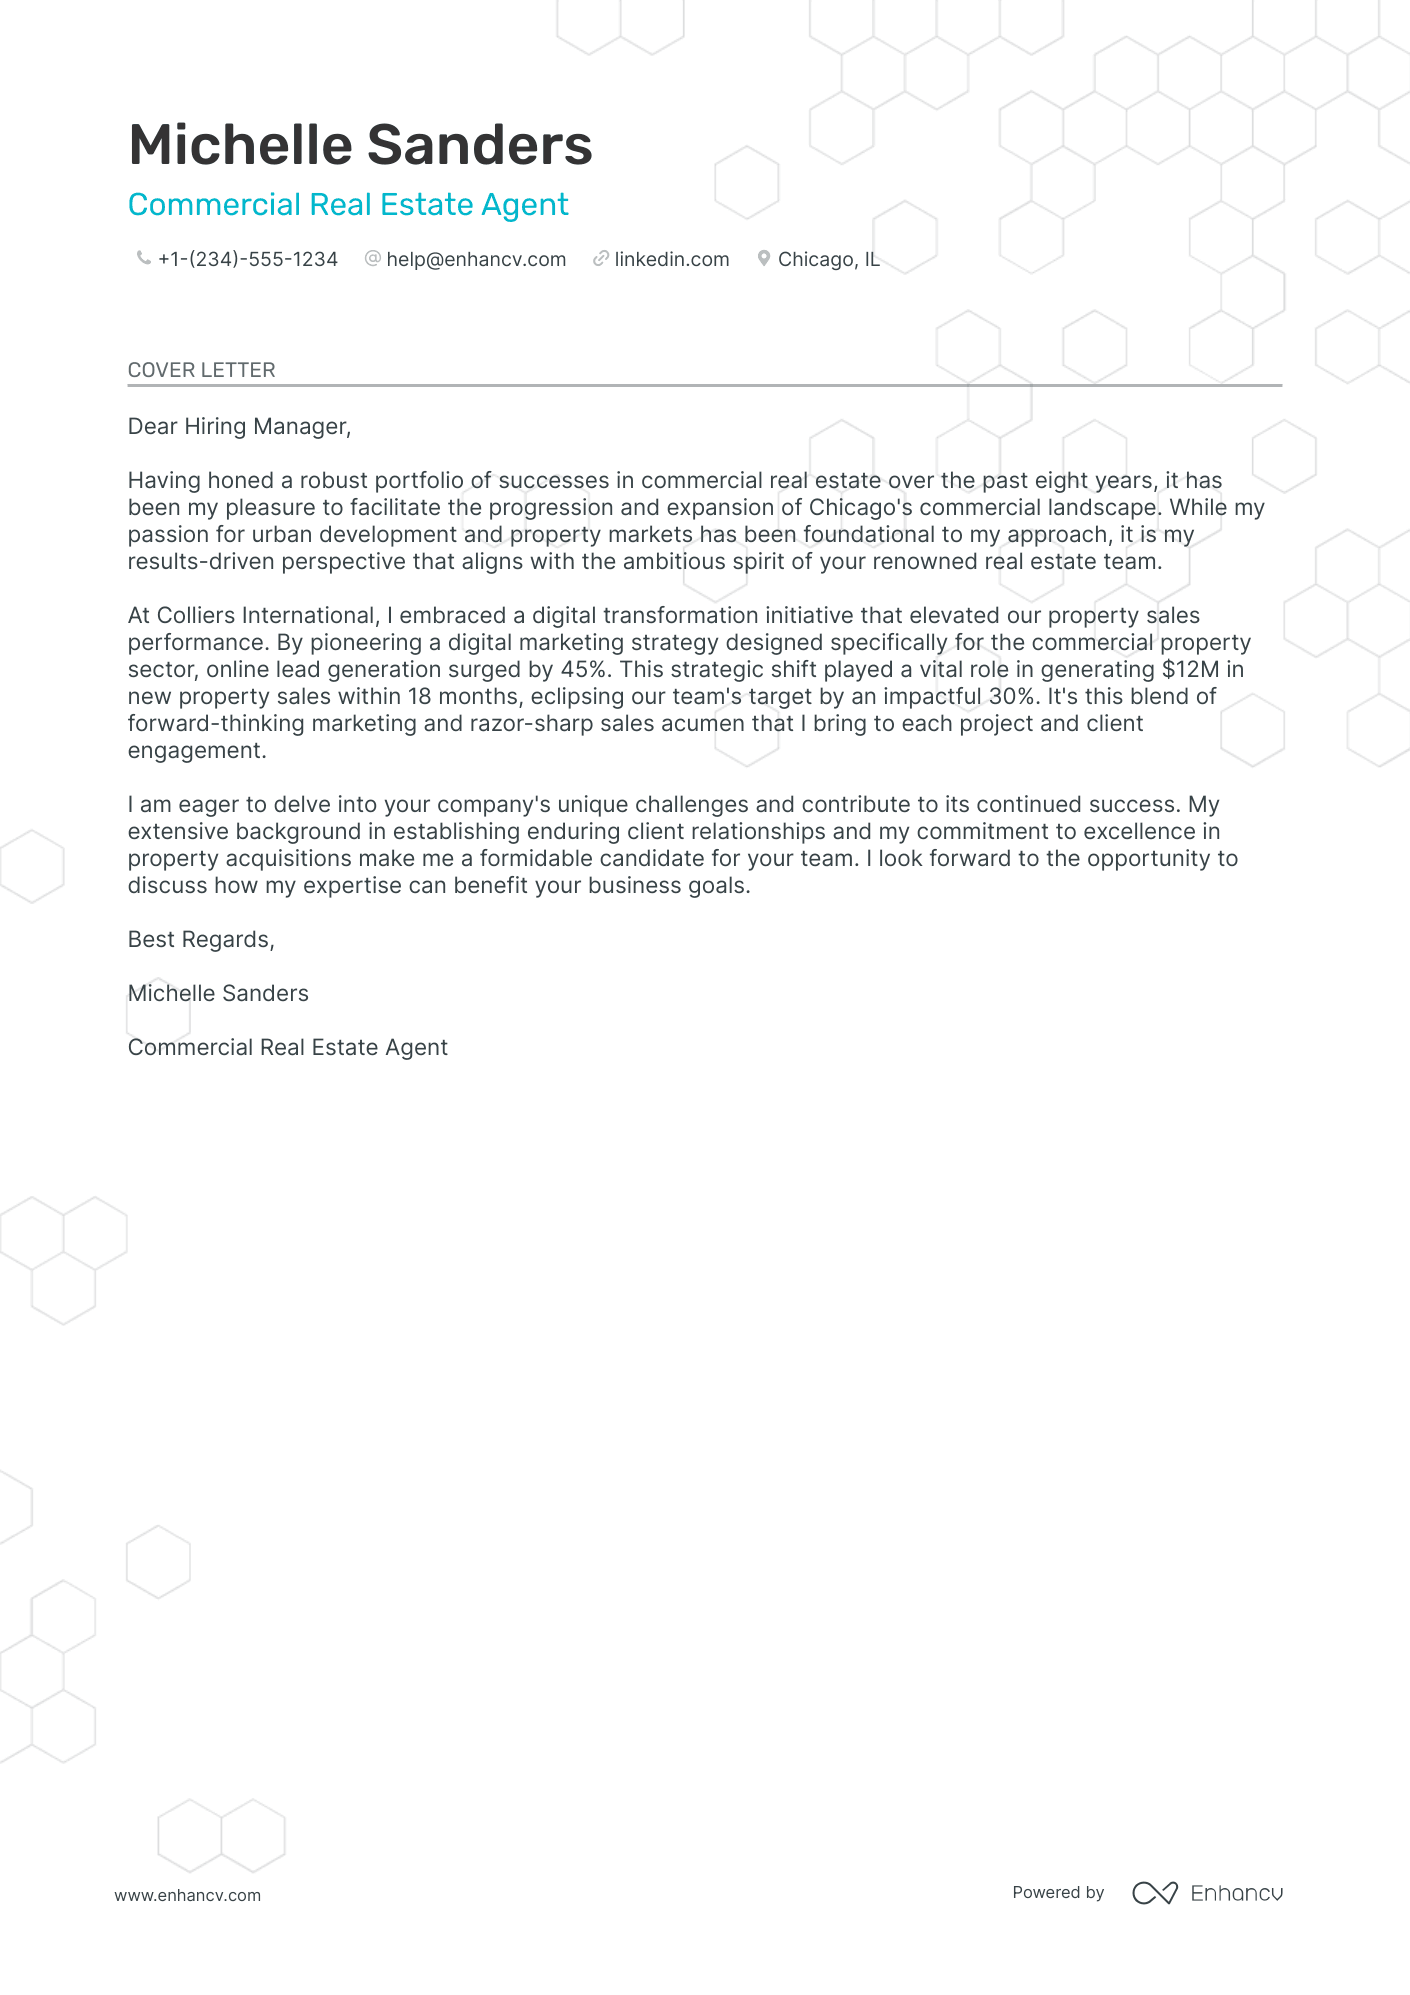 Commercial Real Estate Agent cover letter